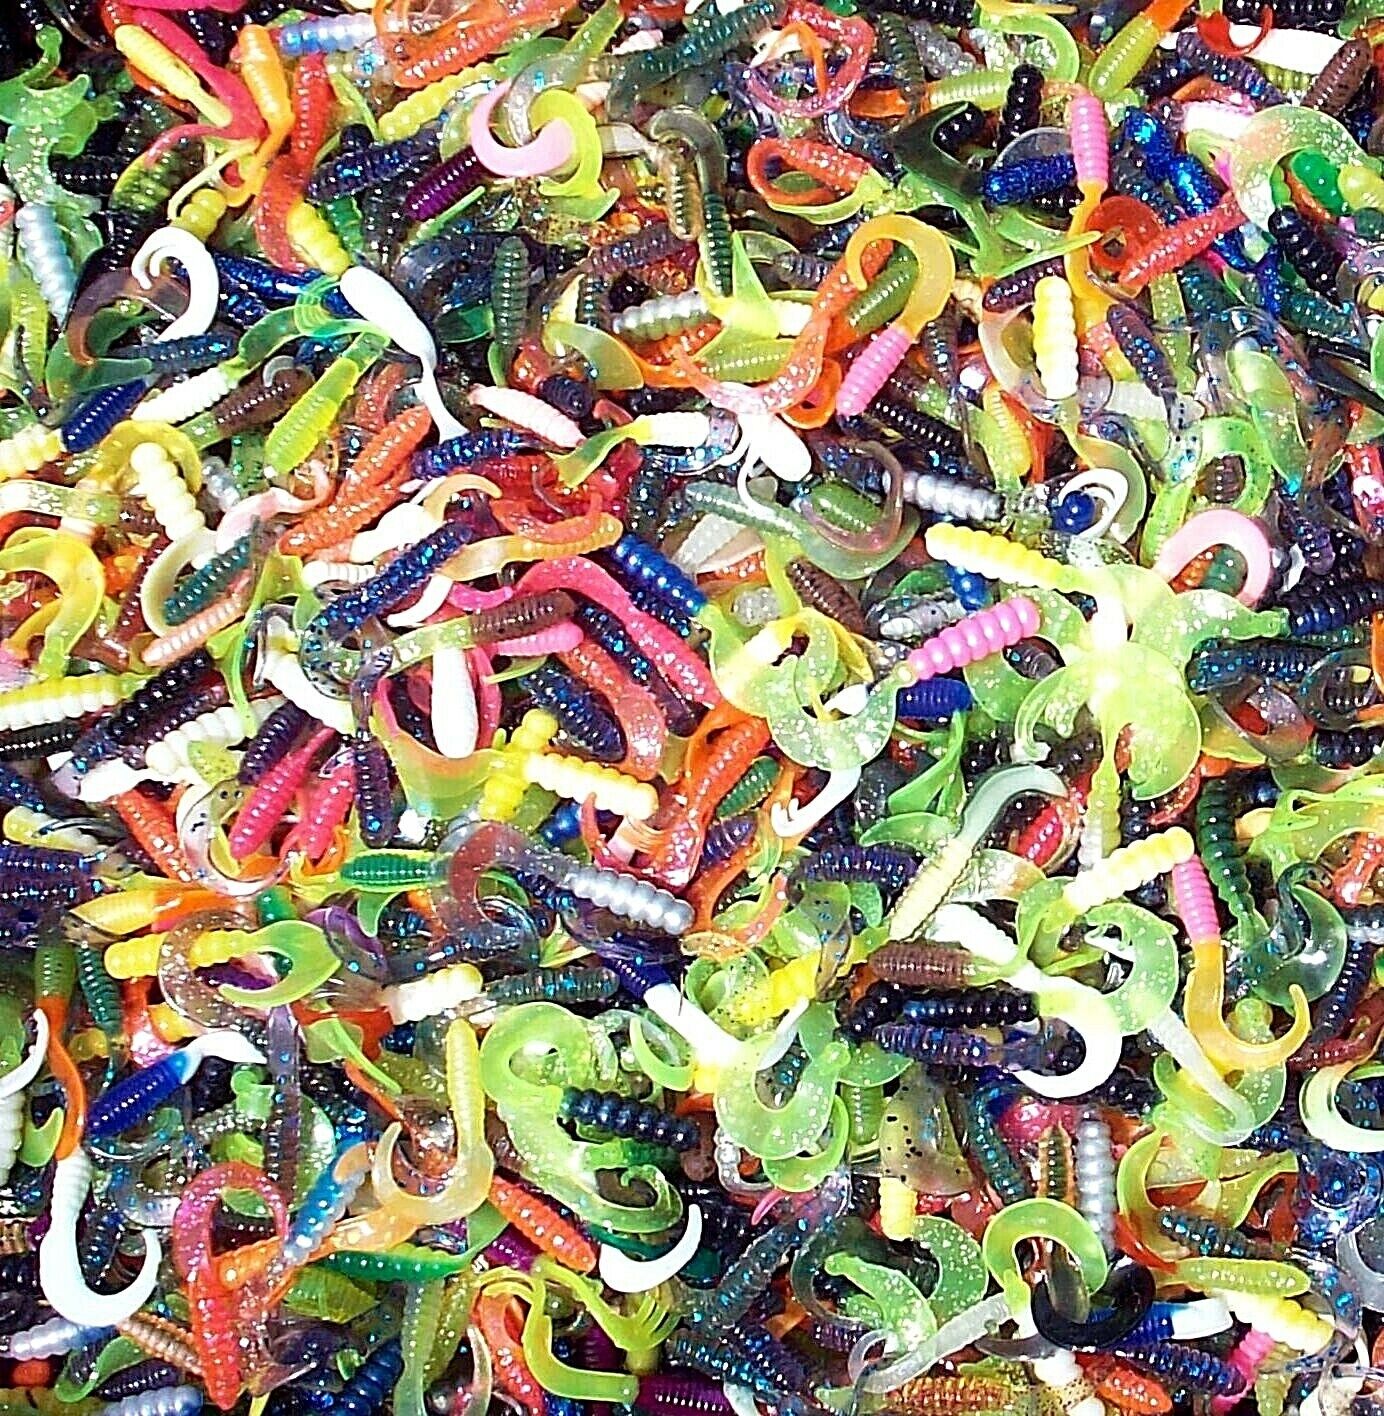 ::100 ASSORTED 2" Curly Tail GRUBS Crappie Fishing Lures Trout Panfish Perch Baits